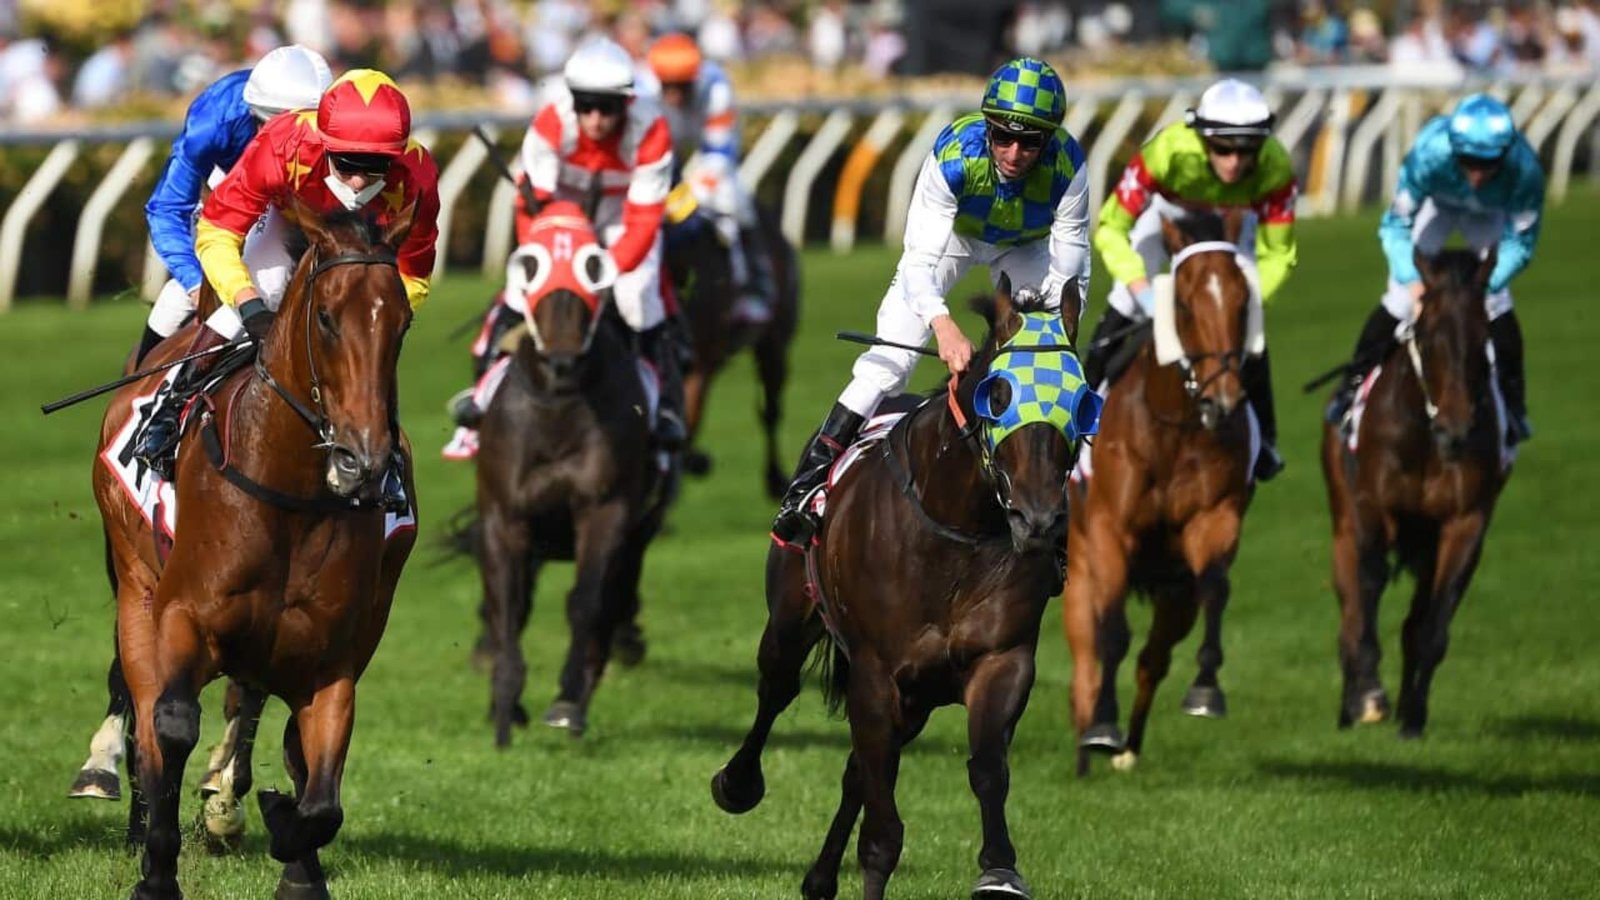 this image shows Horses Racing Live